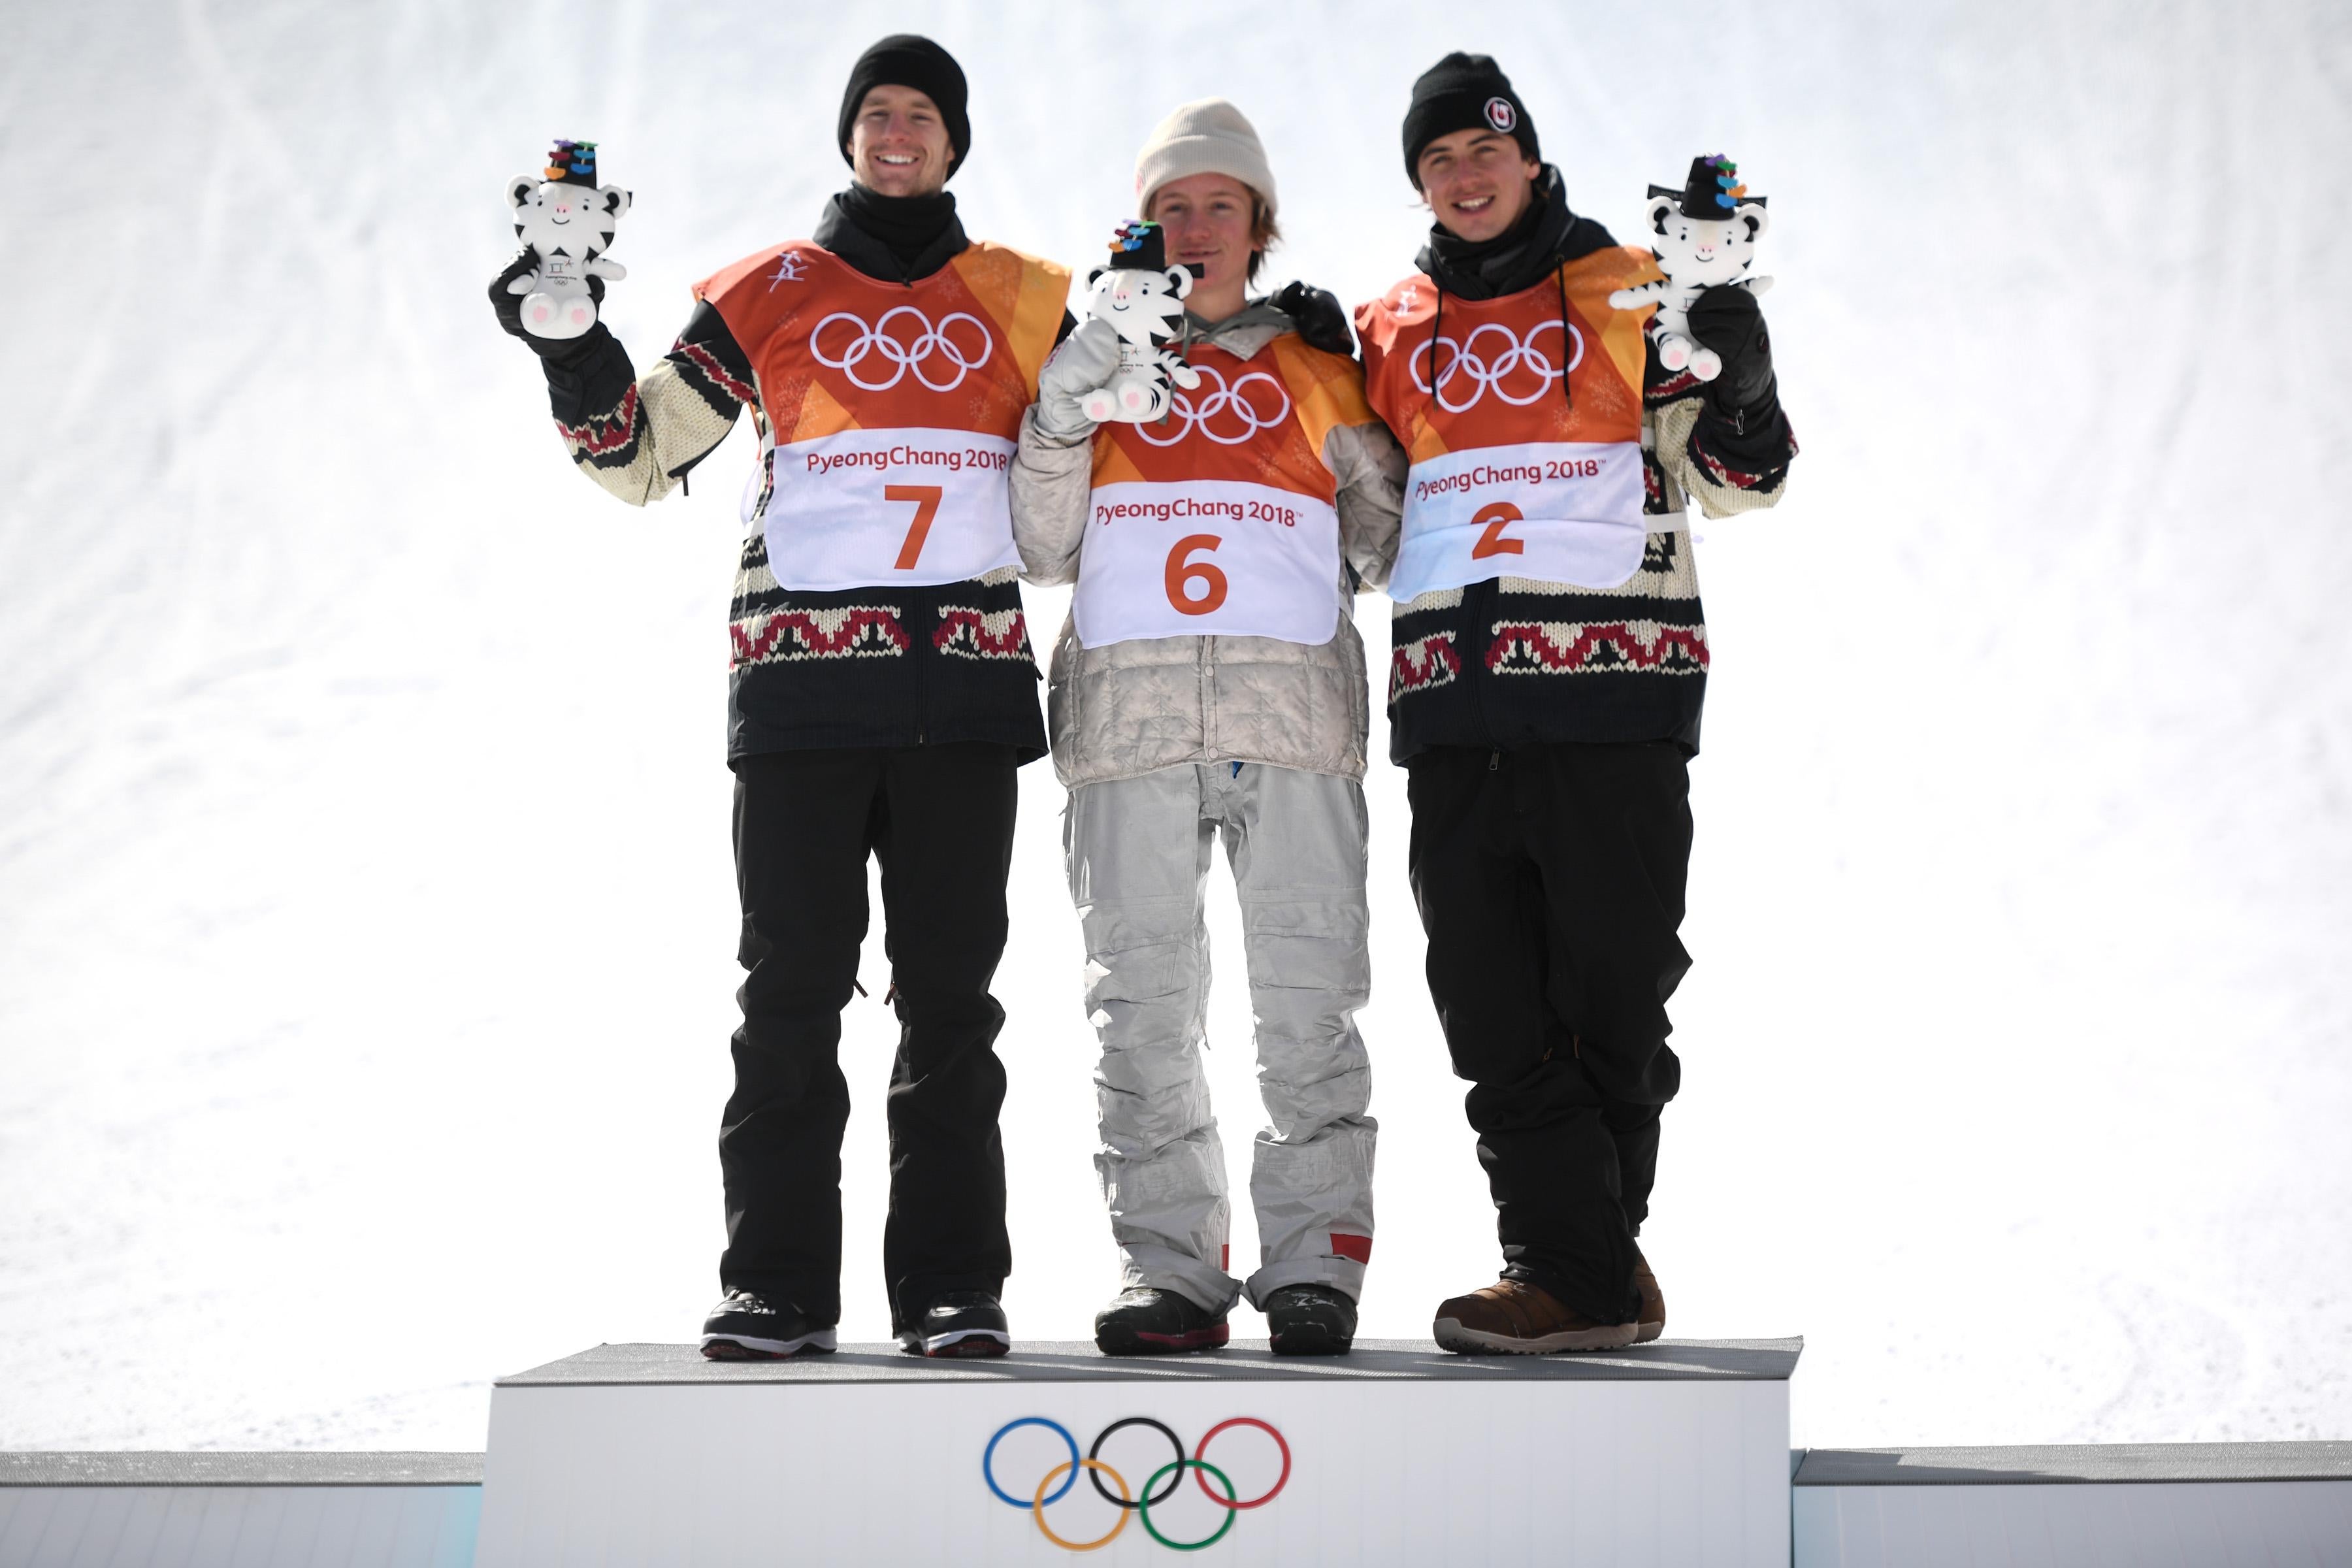 The three slopestyle medalists stand on the podium and hoist their stuffed tigers into the air.